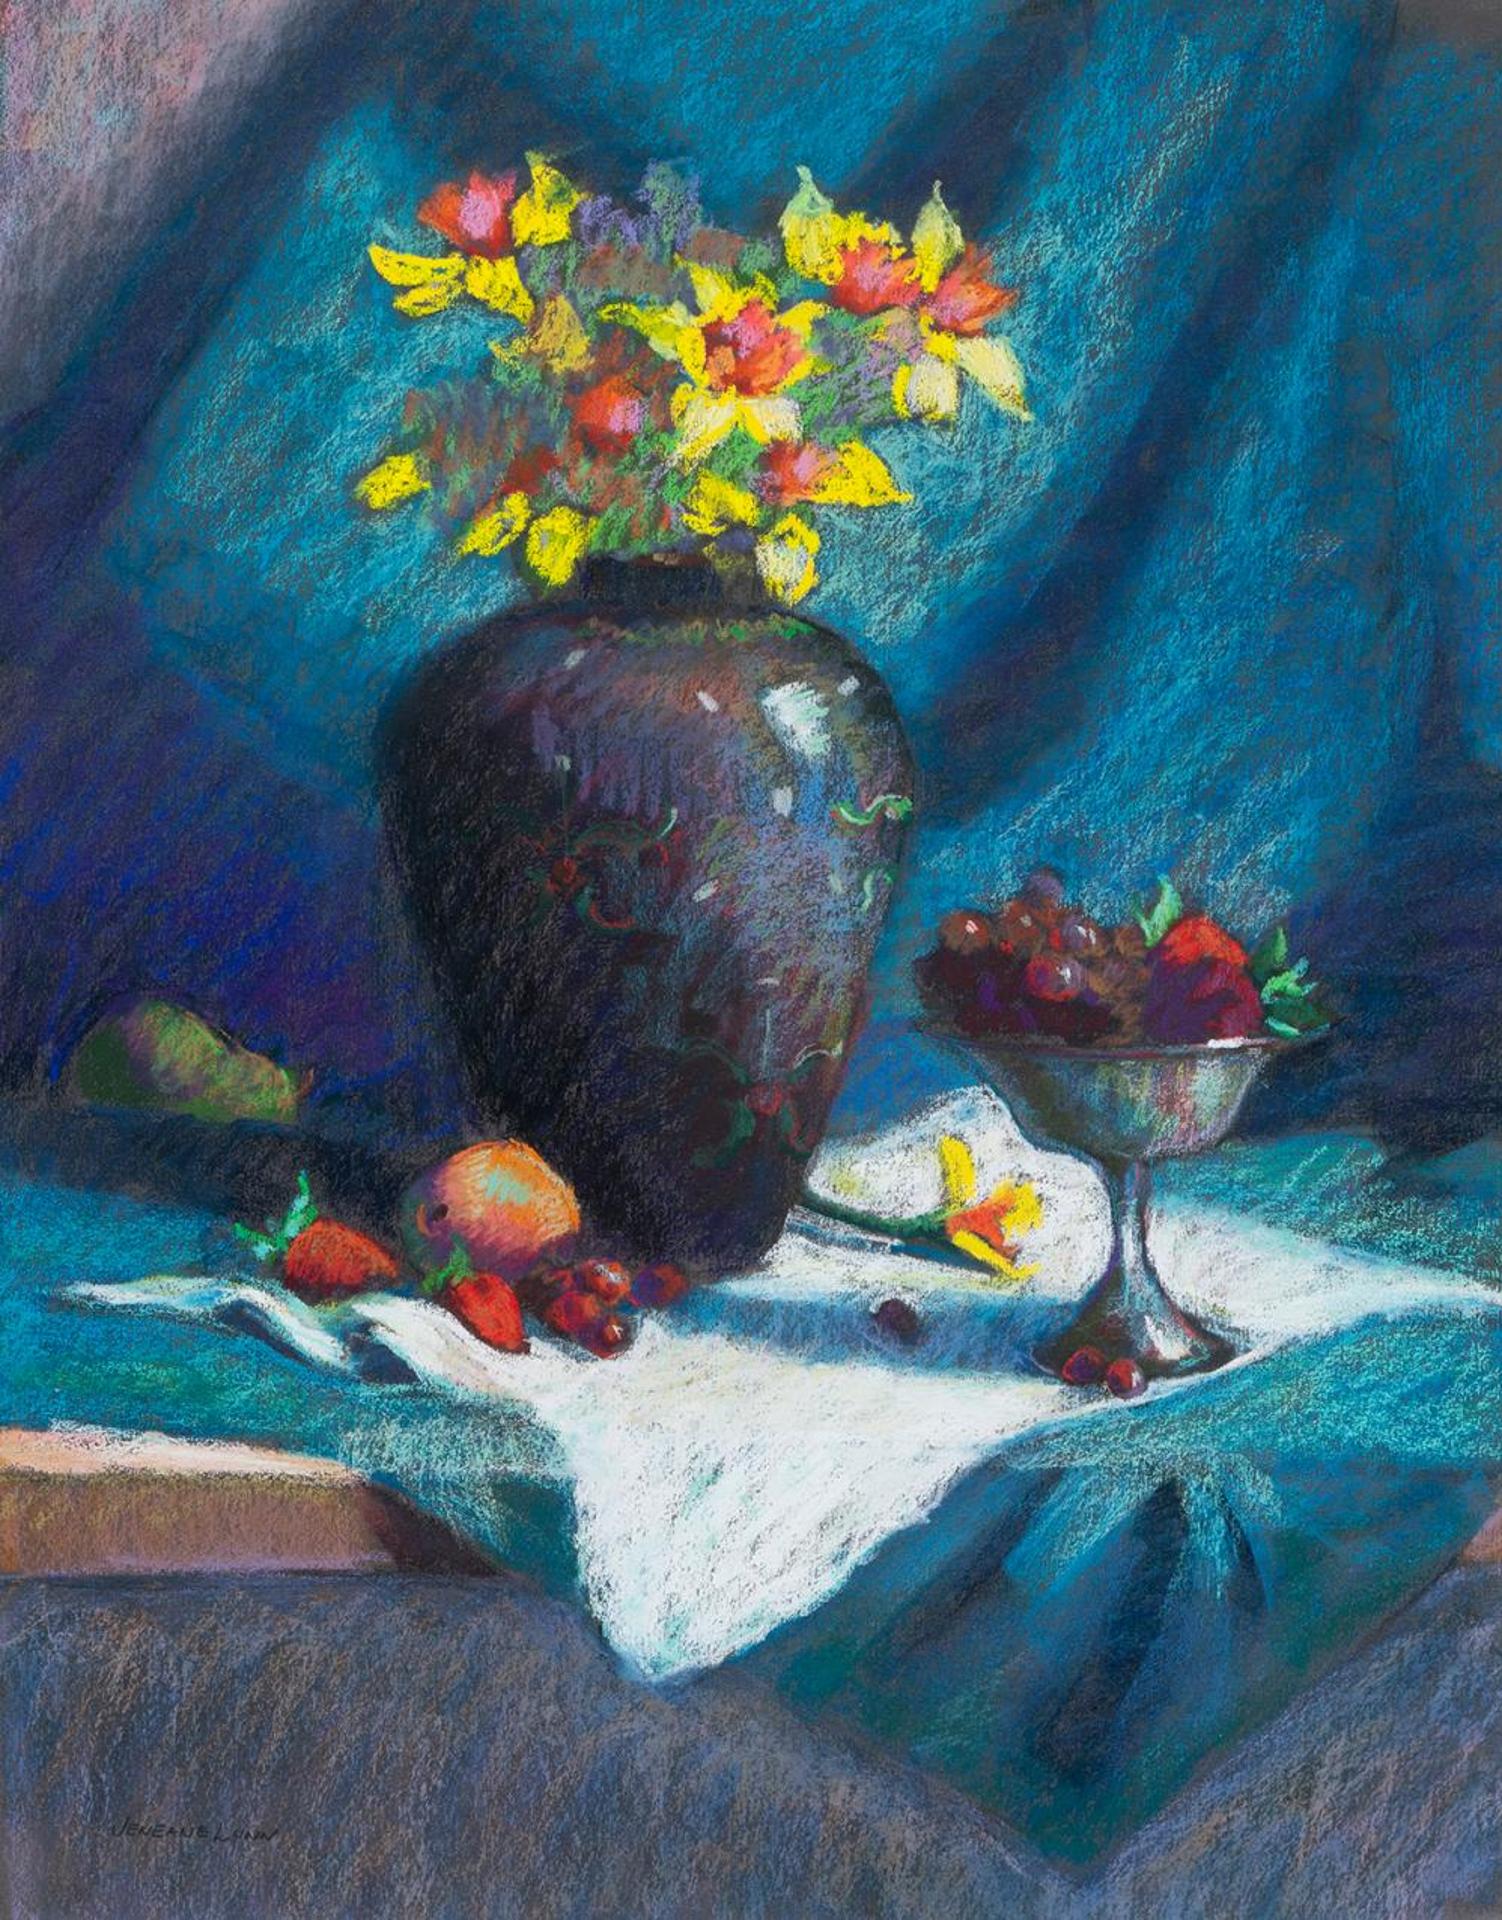 Jeneane Lunn - Untitled - Still Life With Fruit Bowl